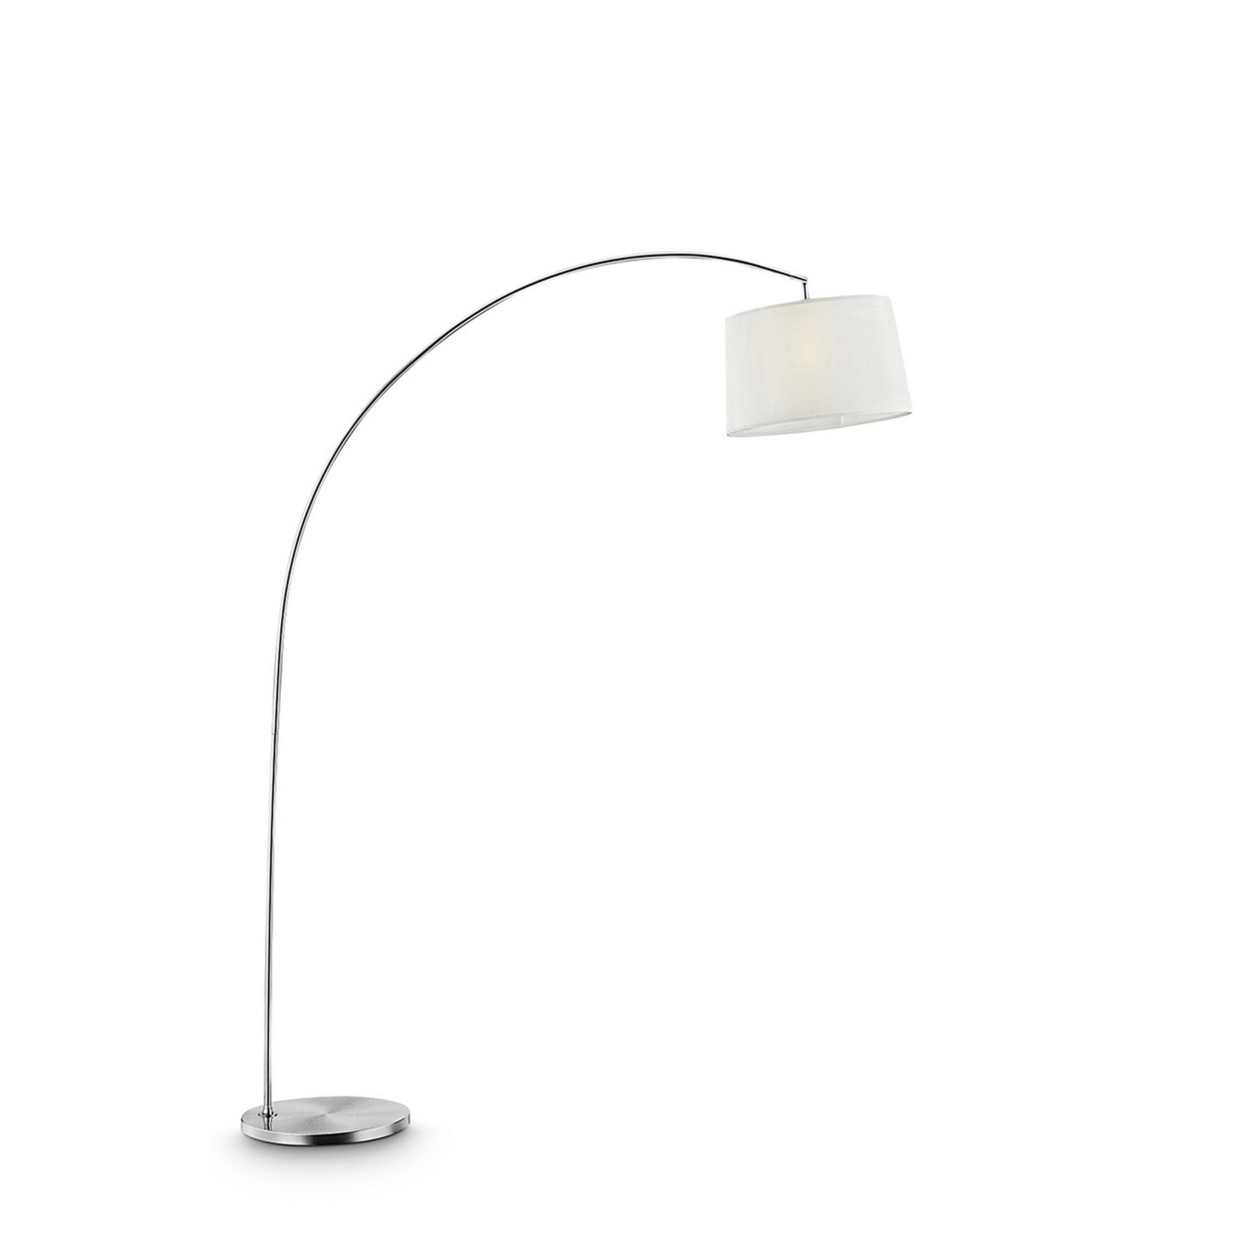 Floor Lamp With Arched Metal Body, Silver And White- Saltoro Sherpi